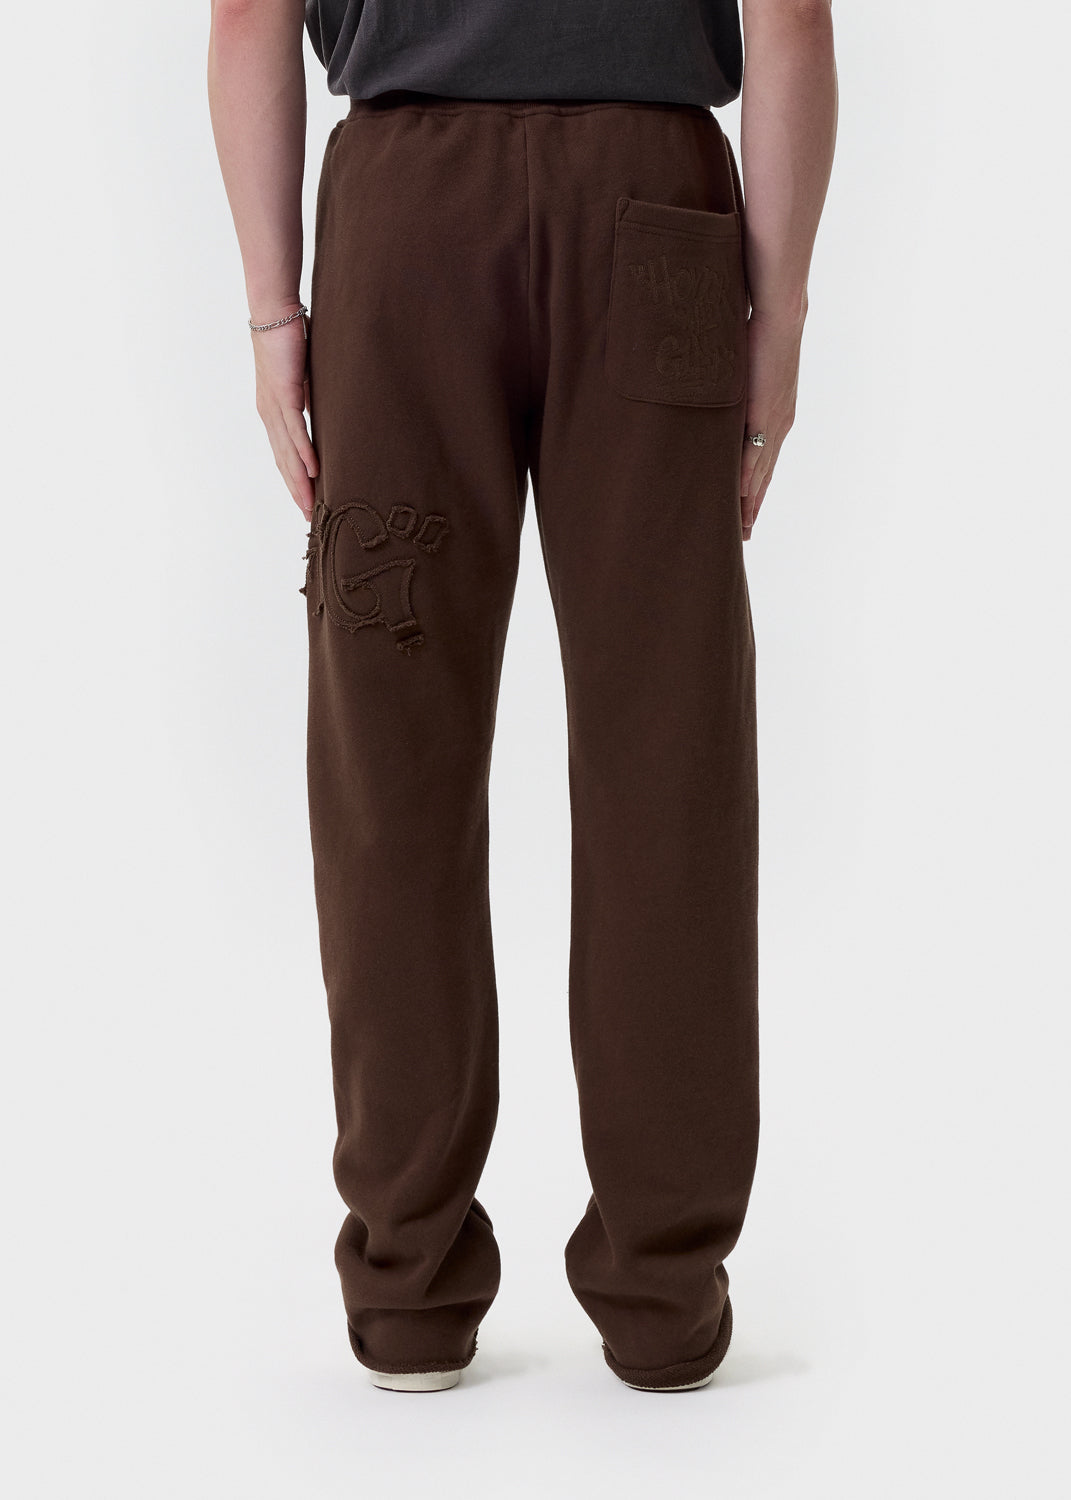 Honor the Gift - Brown Script Embroidered Sweatpants | 1032 SPACE